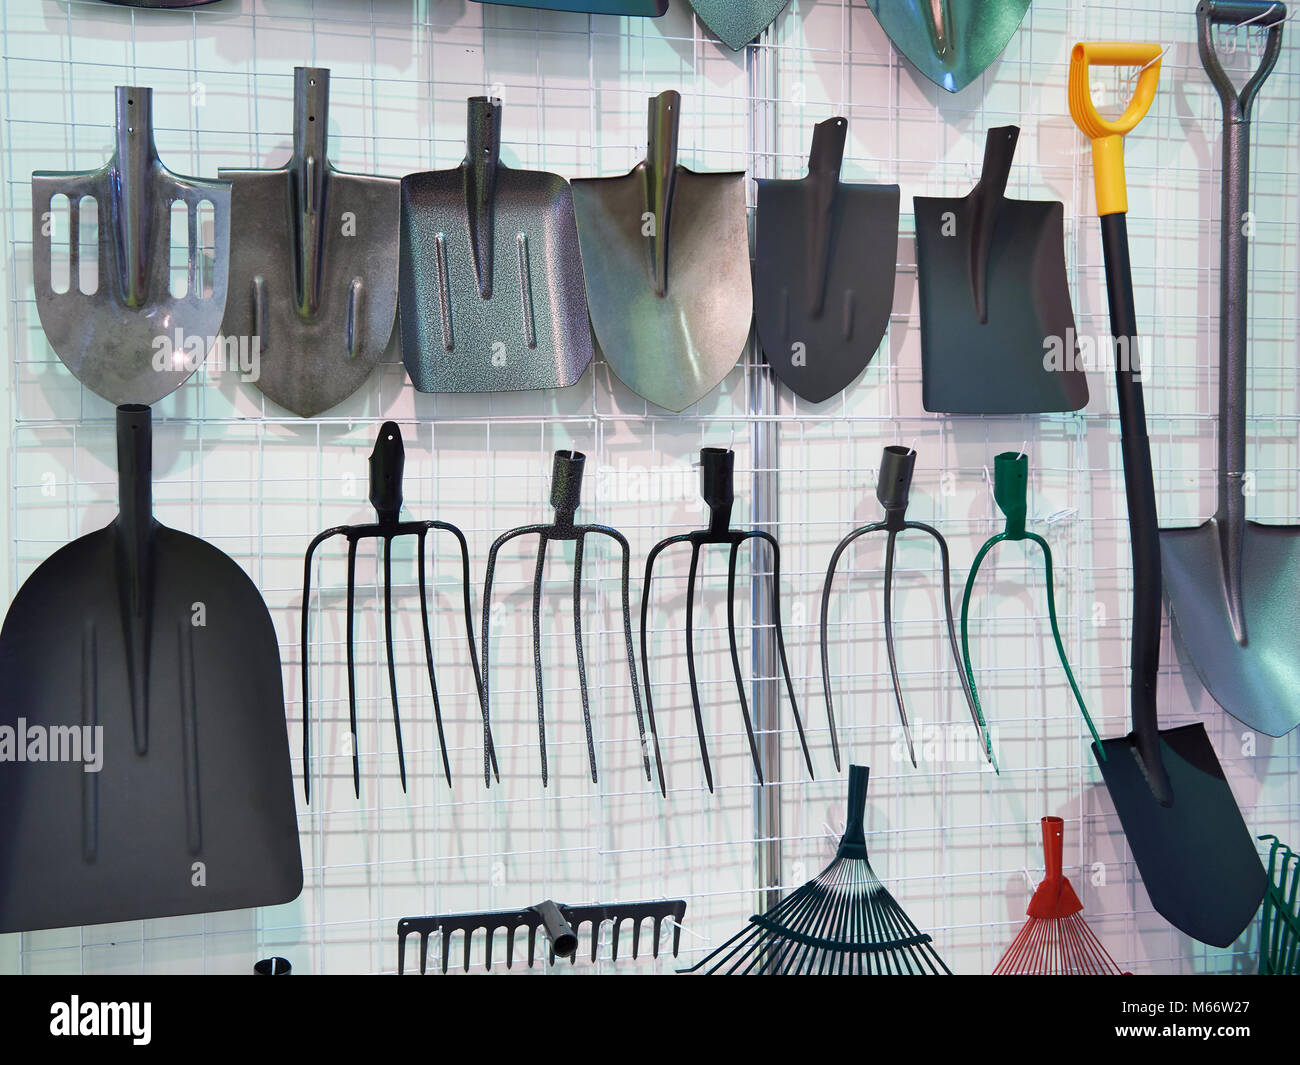 Shovels and forks in the hardware store Stock Photo